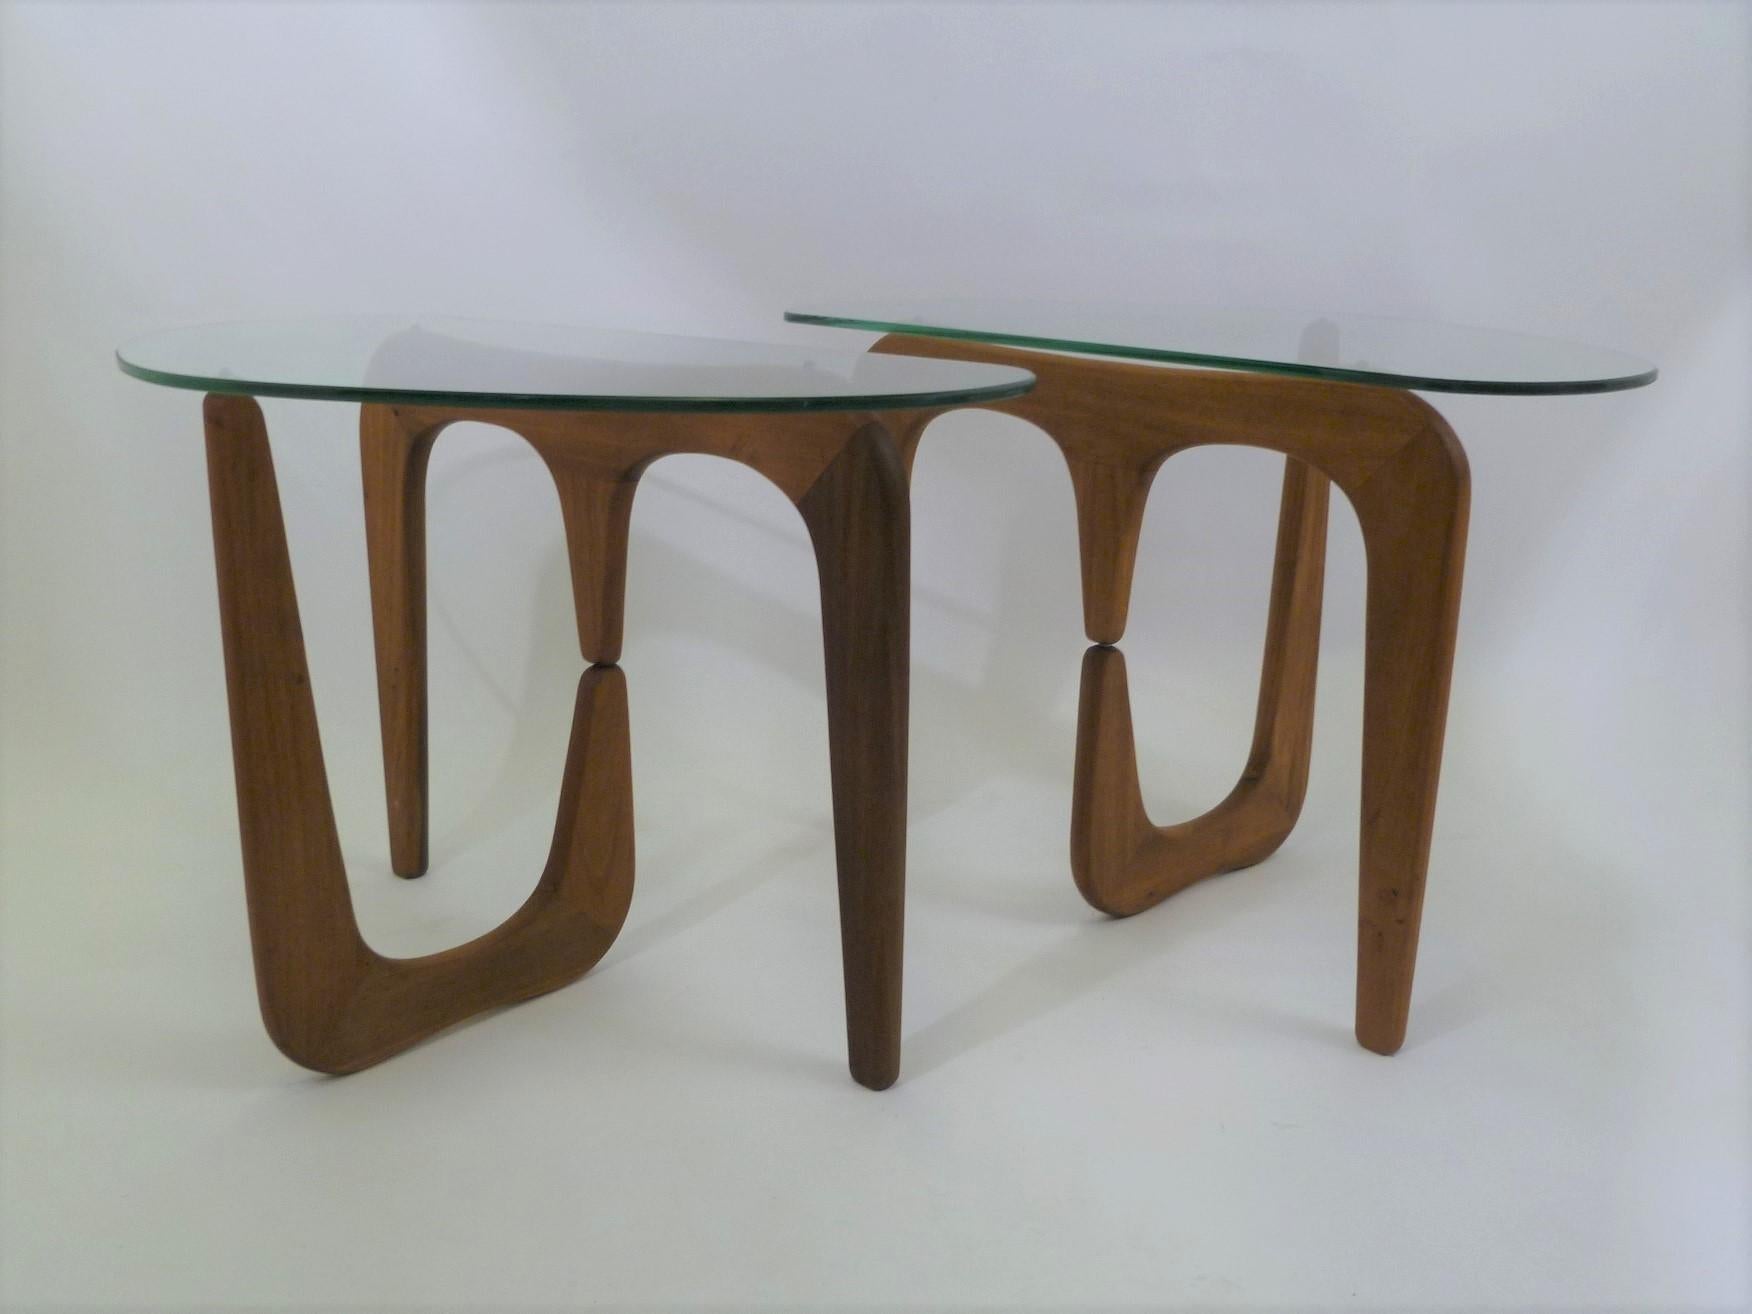 Organic modern side tables with floating glass tops have inspiration from Isamu Noguchi with their amoeba D-shaped tops over walnut carved bases. Newly replaced glass tops, the bases are beautiful figured walnut in a stylized whale bone form. When